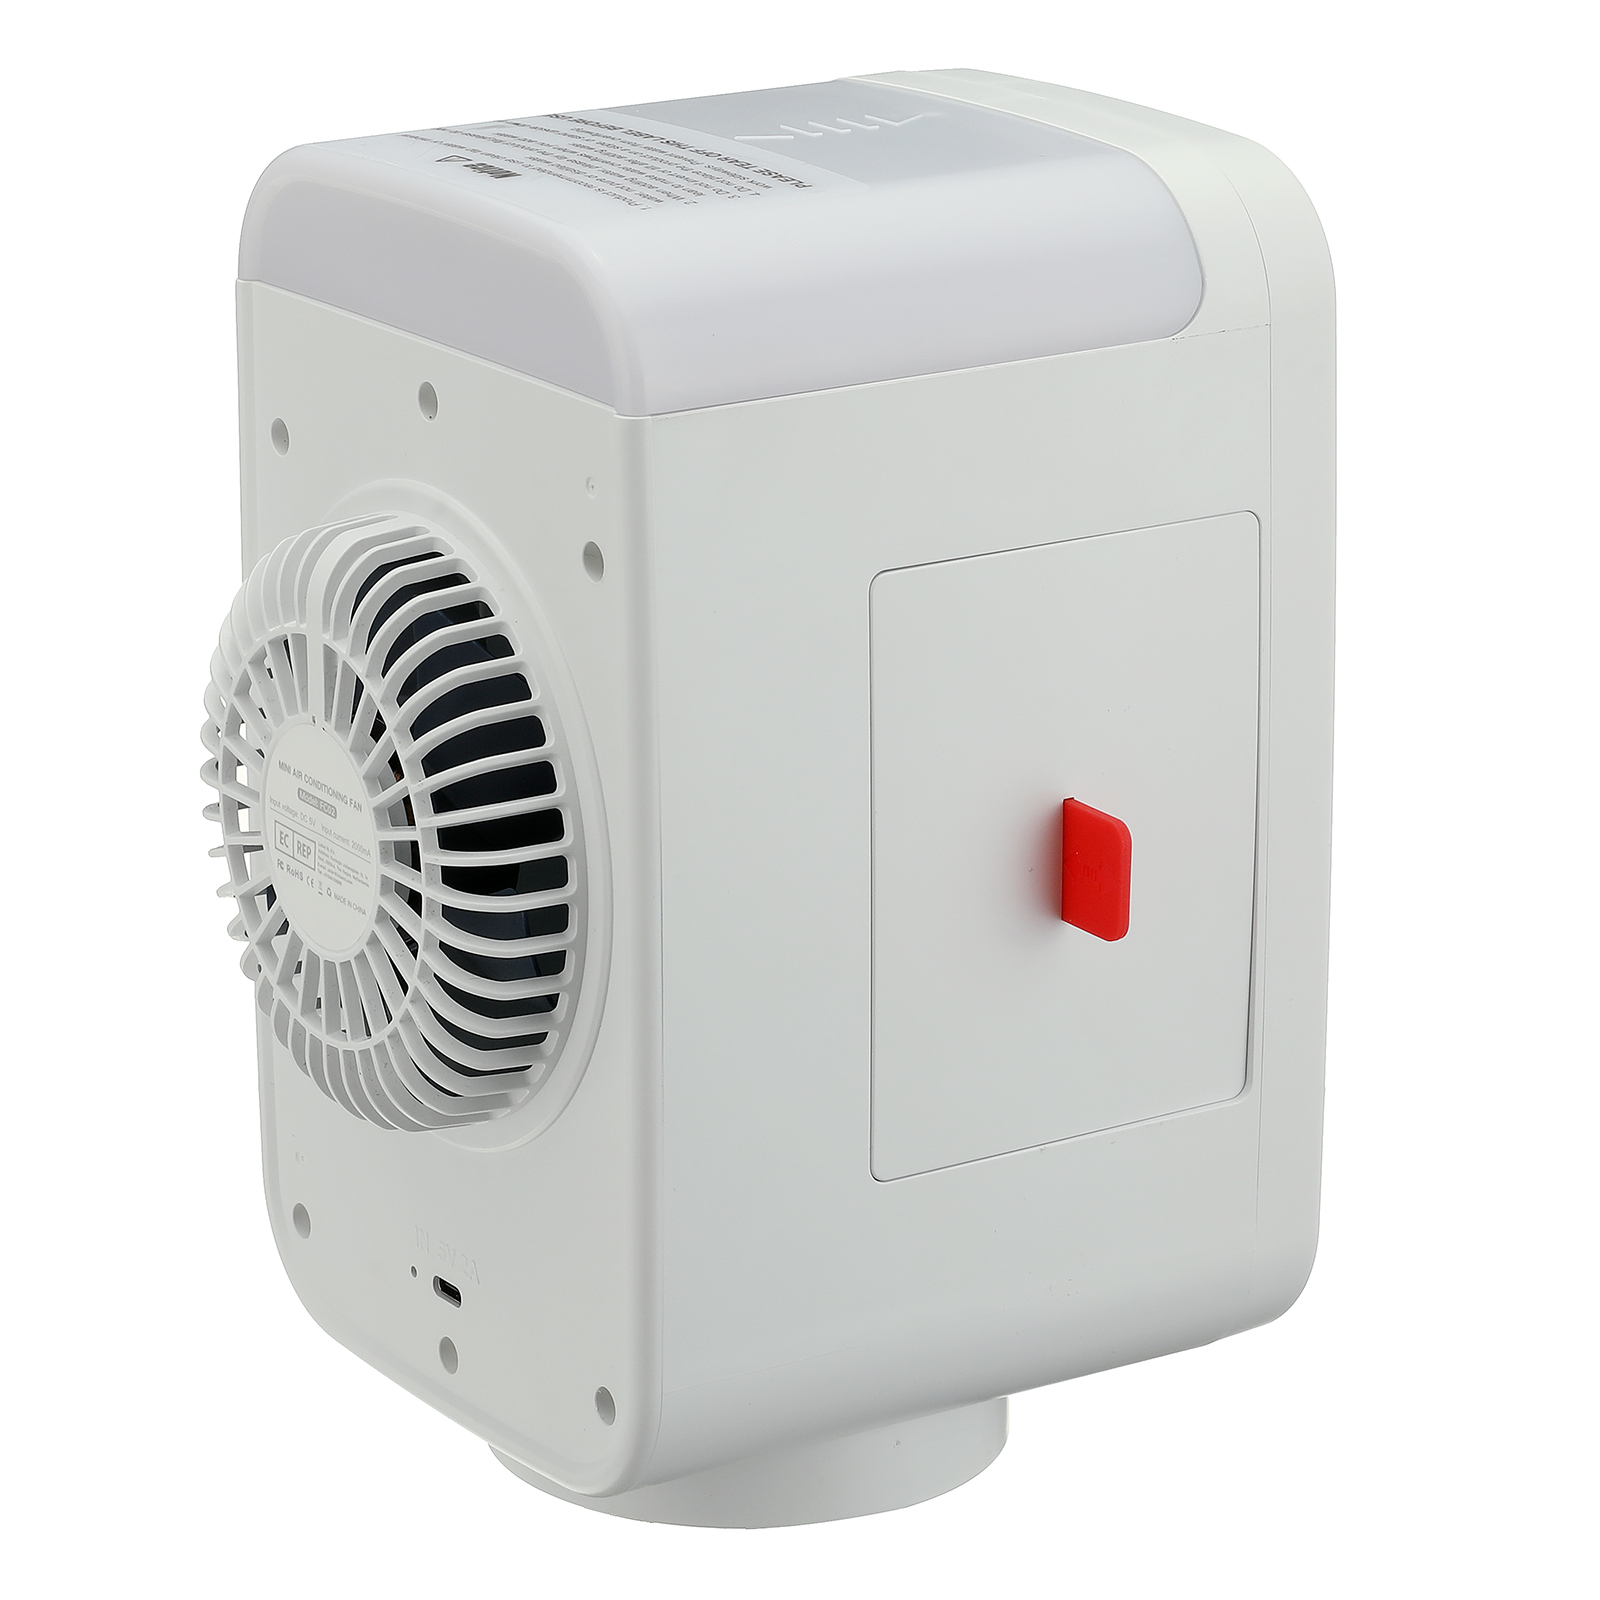 5-in-1-Mini-Air-Cooler-3-Wind-Speed-Adjustment-120deg-Wide-Angle-Rotation-Air-Humidification-Conditi-1885105-19